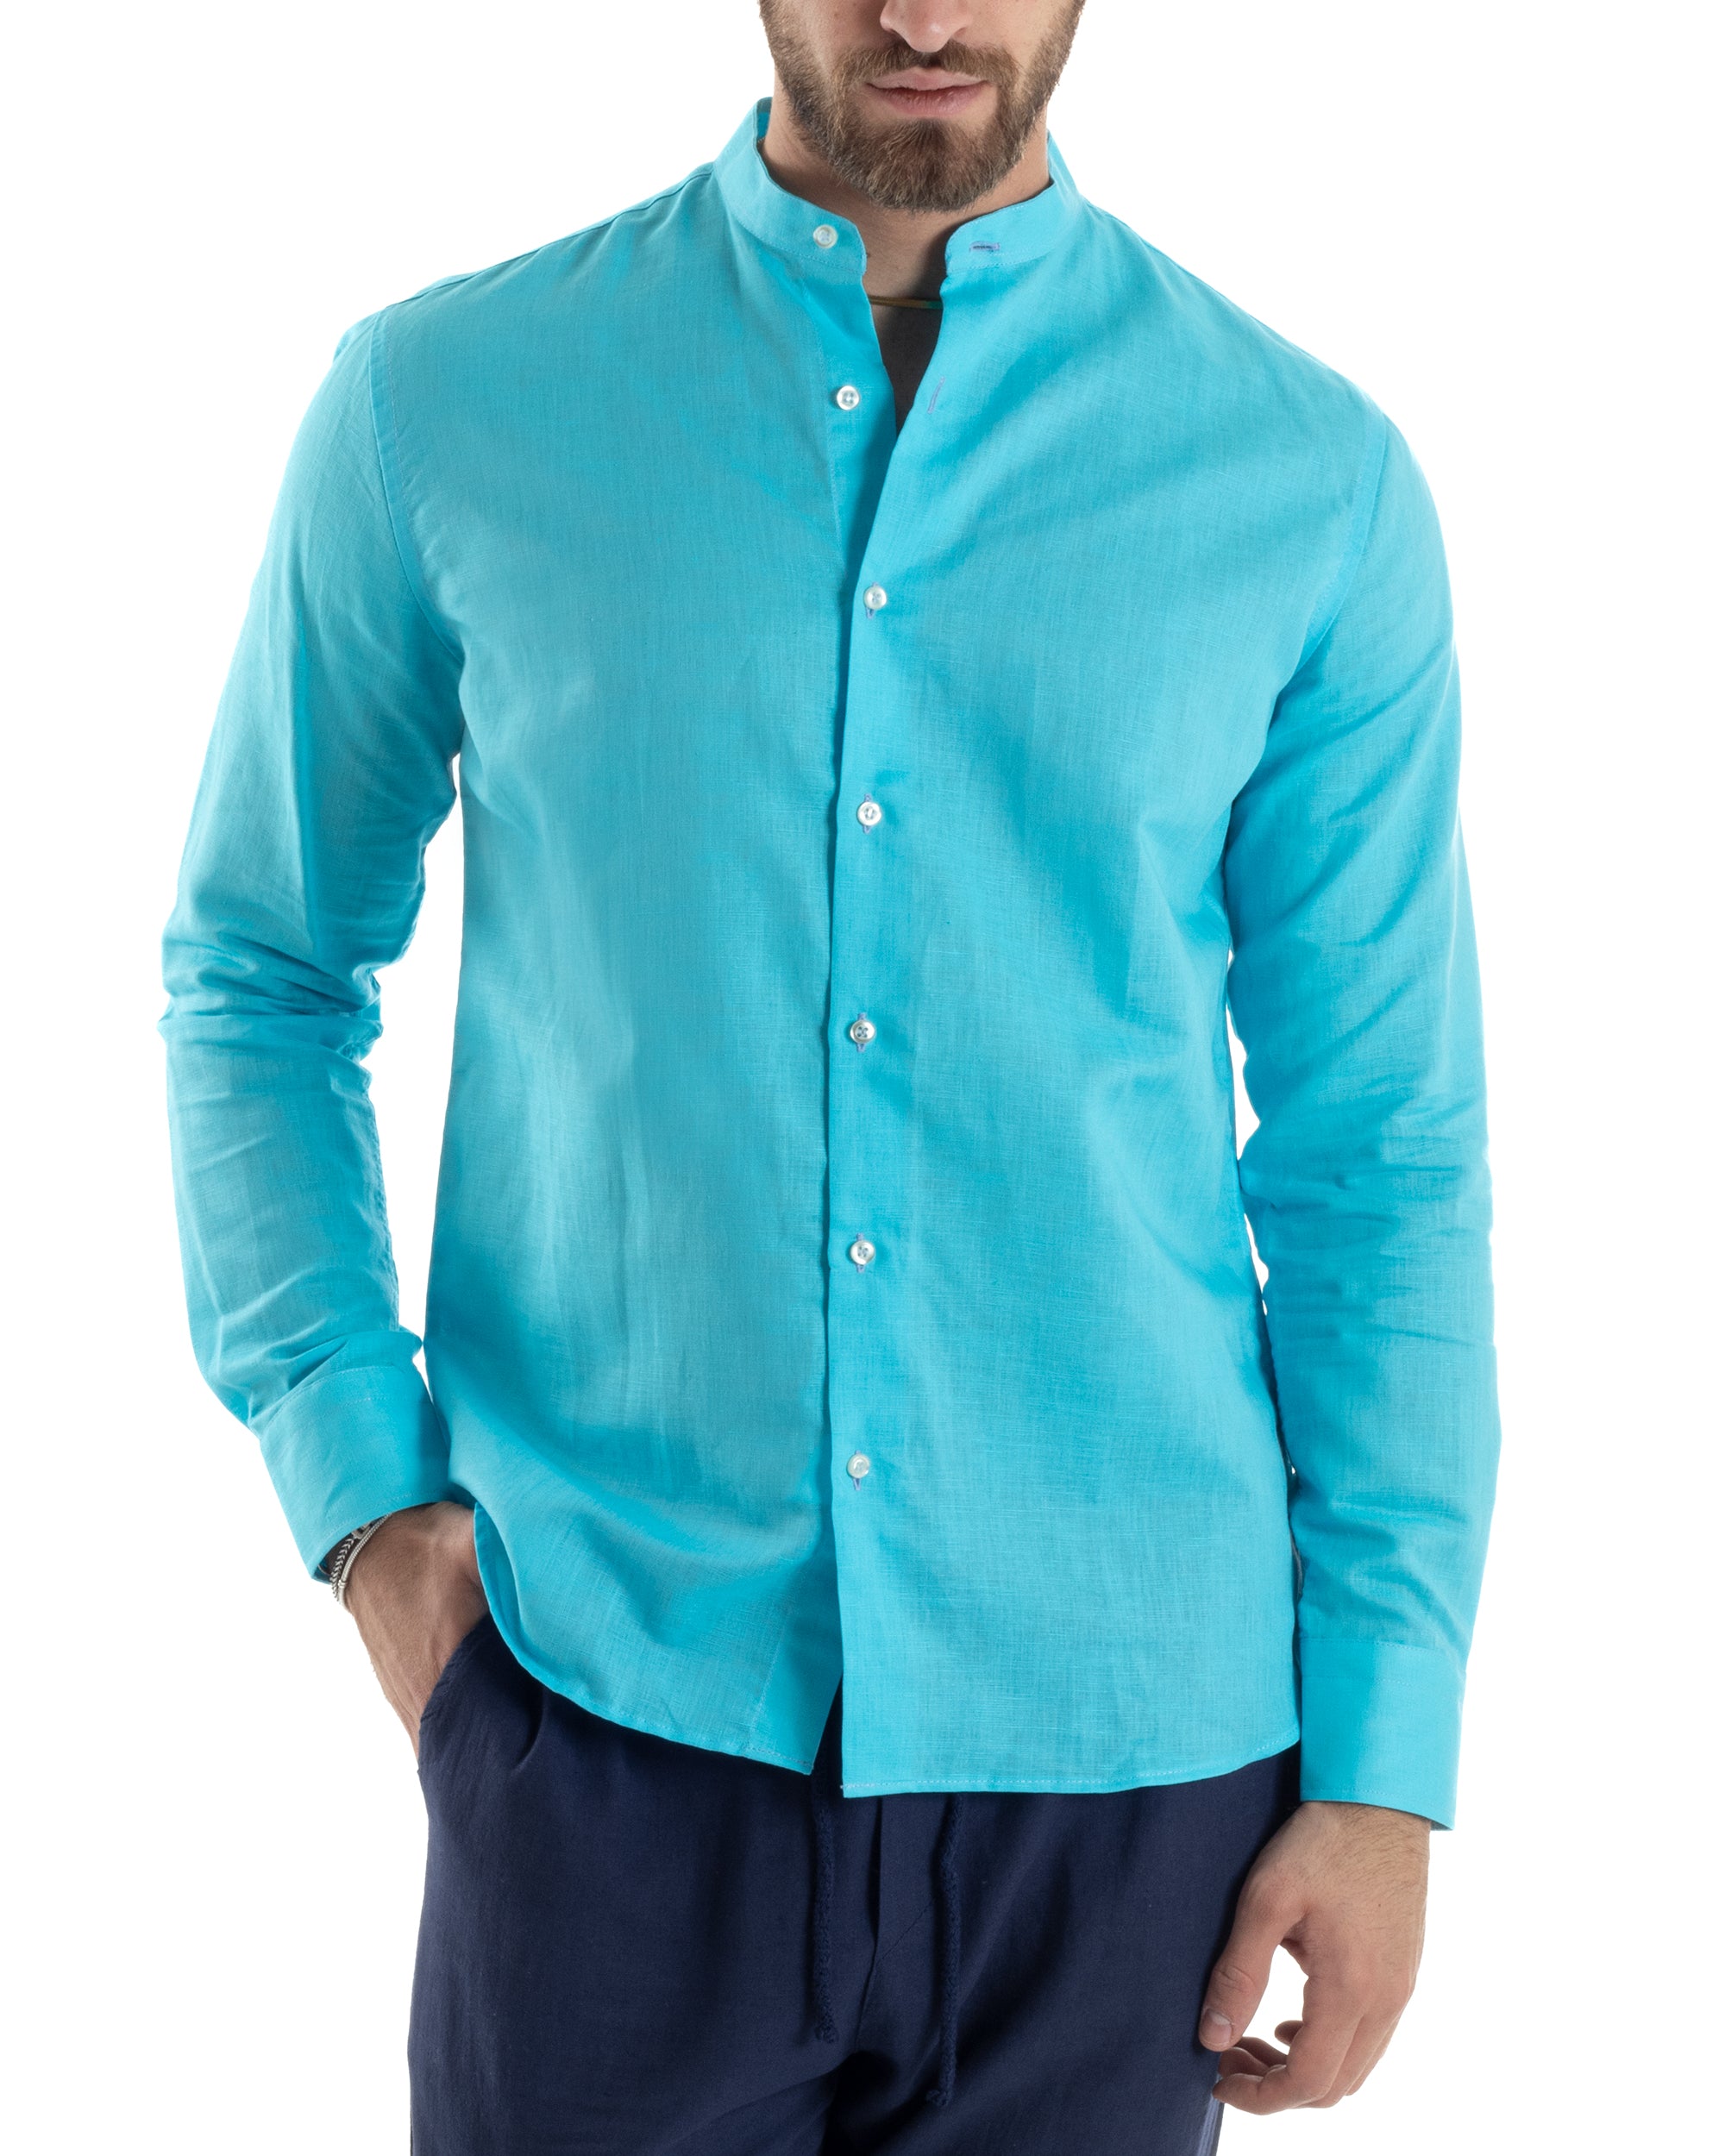 Men's Mandarin Collar Shirt Long Sleeve Linen Solid Color Tailored Turquoise GIOSAL-C2678A